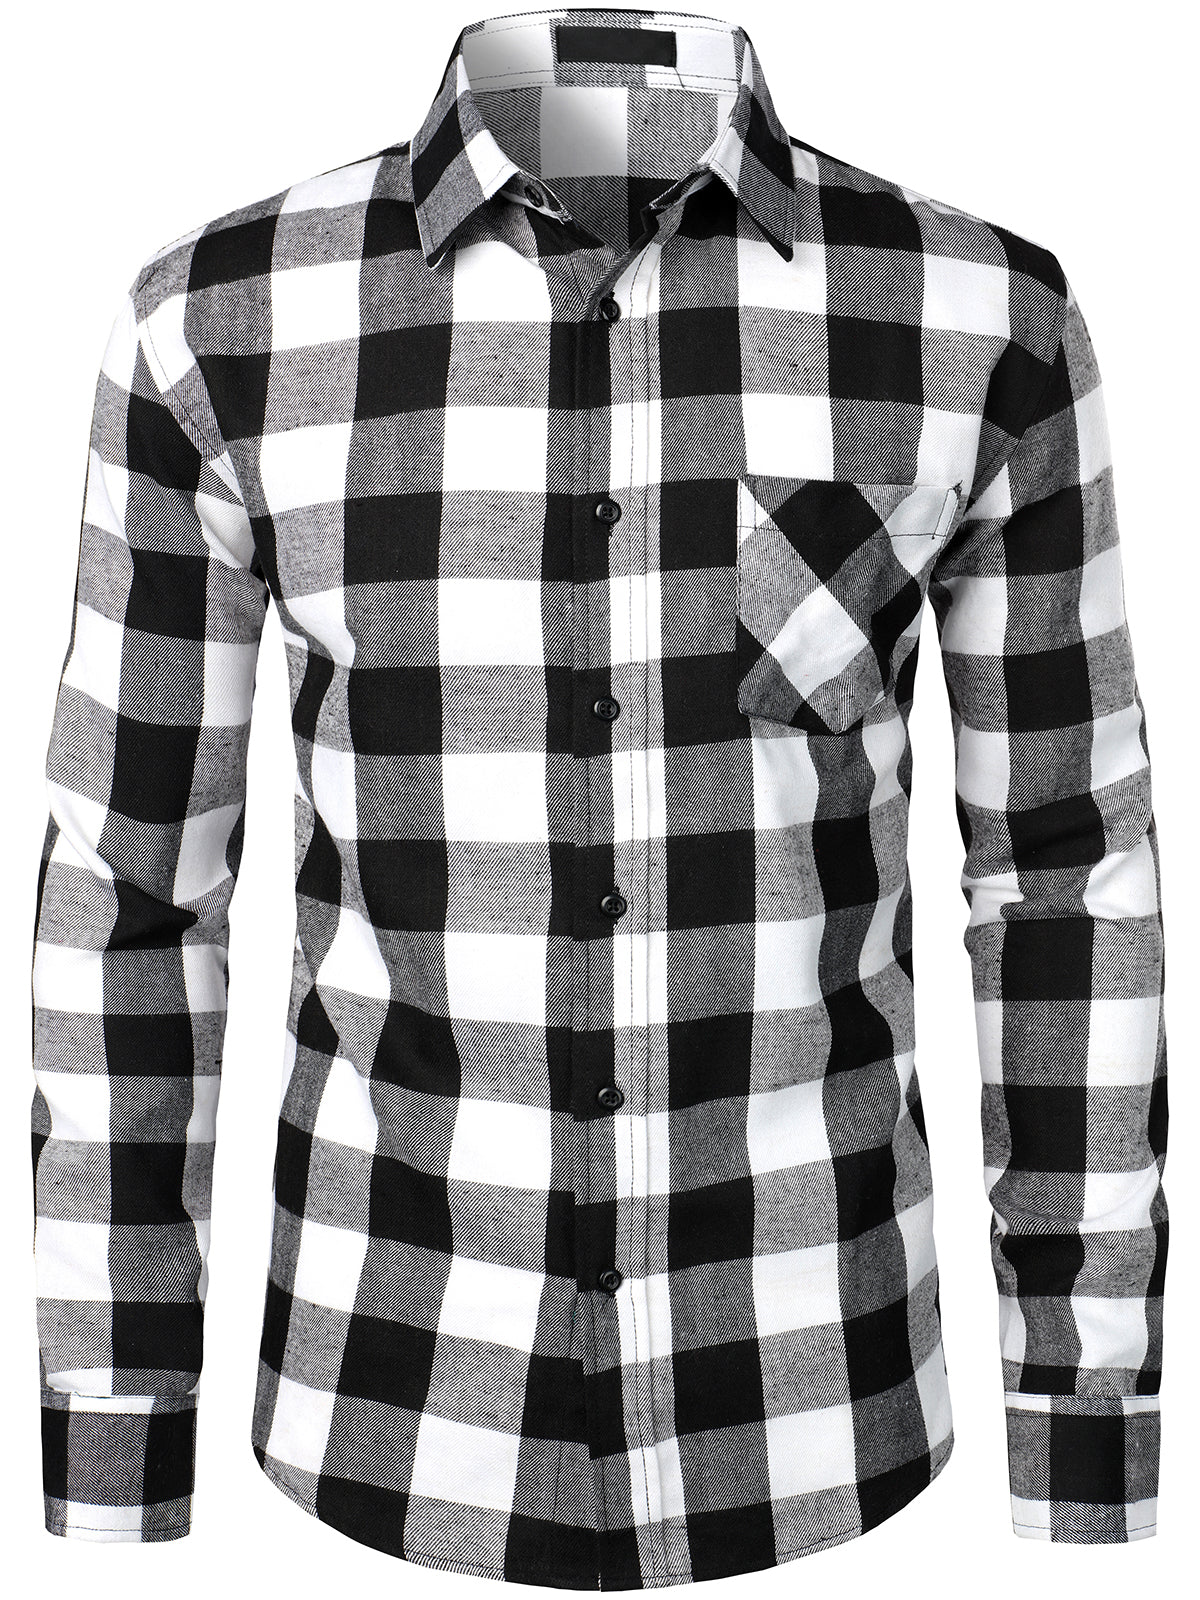 Men's Button Up Regular Fit Long Sleeve Black and White Plaid Flannel Shirt